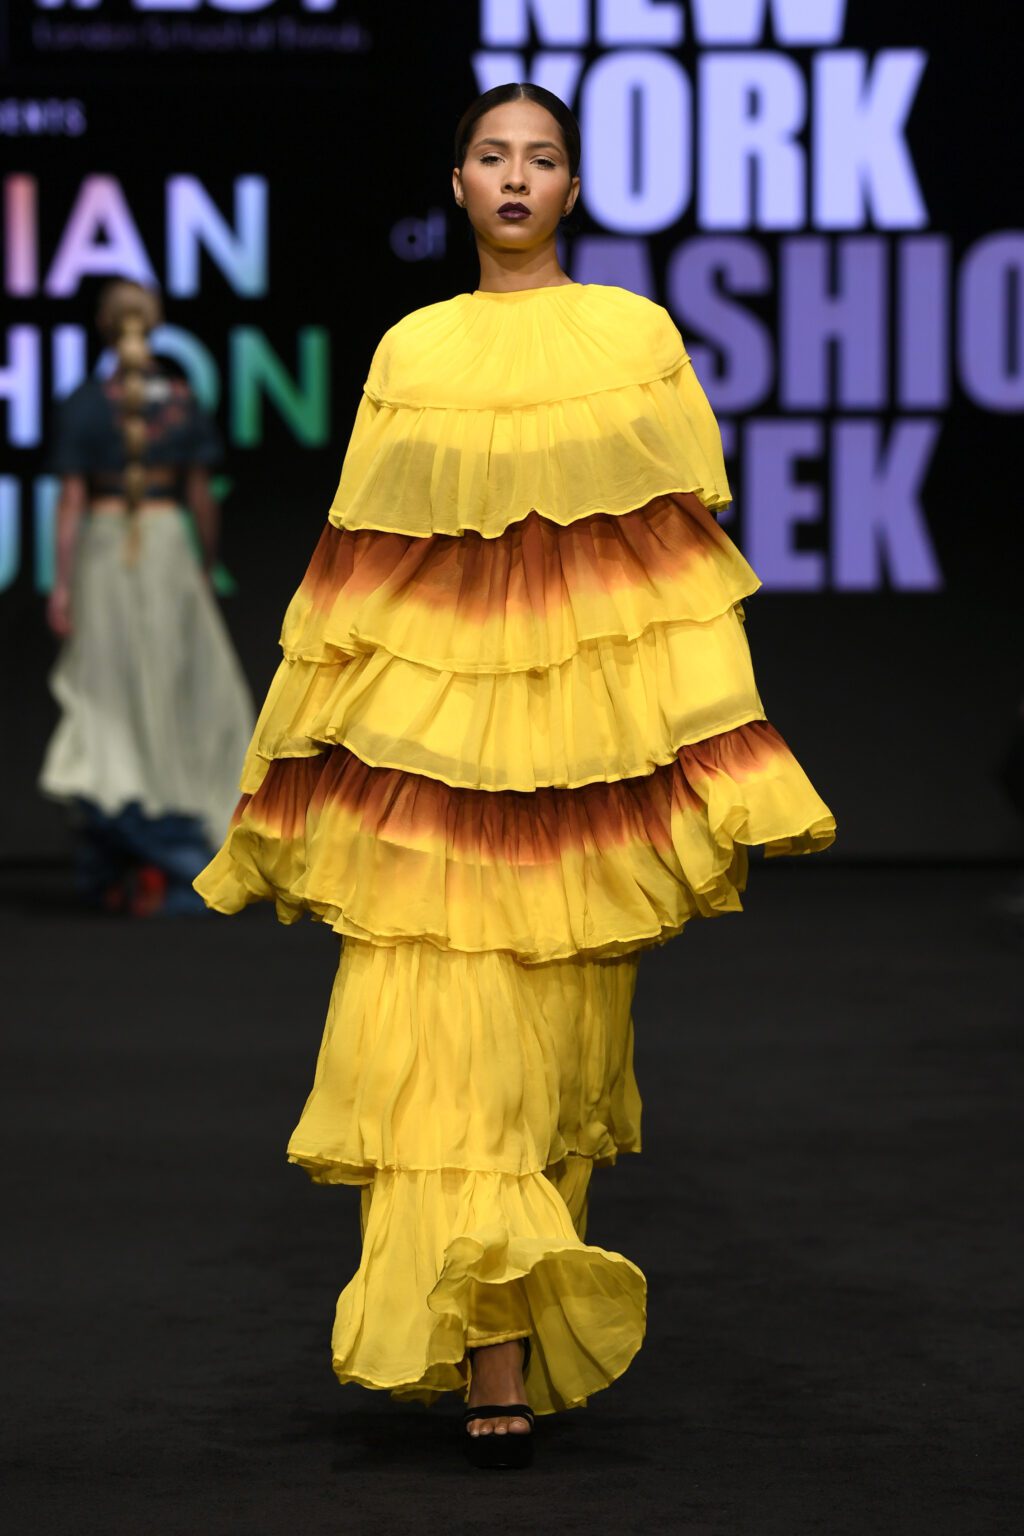 NEW YORK, NEW YORK - FEBRUARY 12: Maria Vicario walks the runway wearing INIFD-LST India Fashion Trunk - At New York Fashion Week Powered By Art Hearts Fashion at The Ziegfeld Ballroom on February 12, 2022 in New York City. (Photo by Arun Nevader/Getty Images for Art Hearts Fashion)